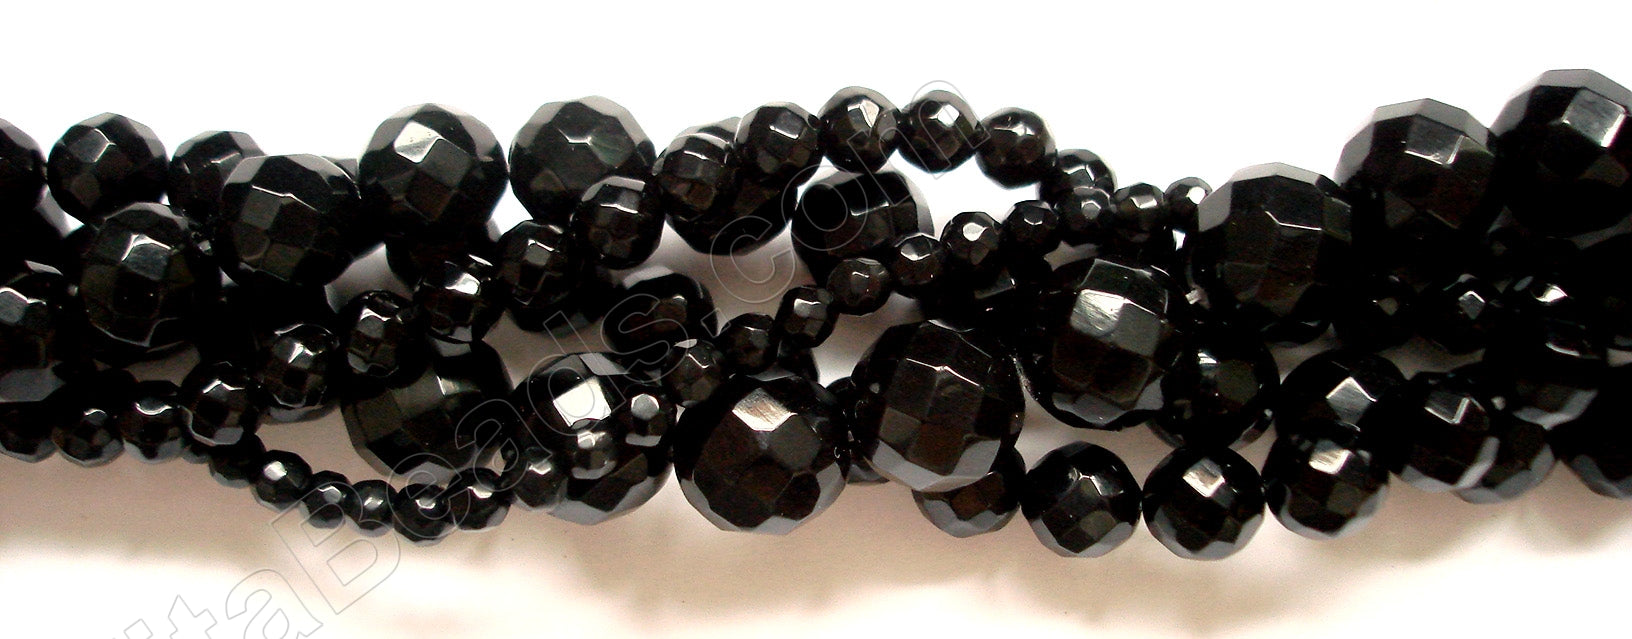 Black Onyx  -  64 Faceted Round  16"